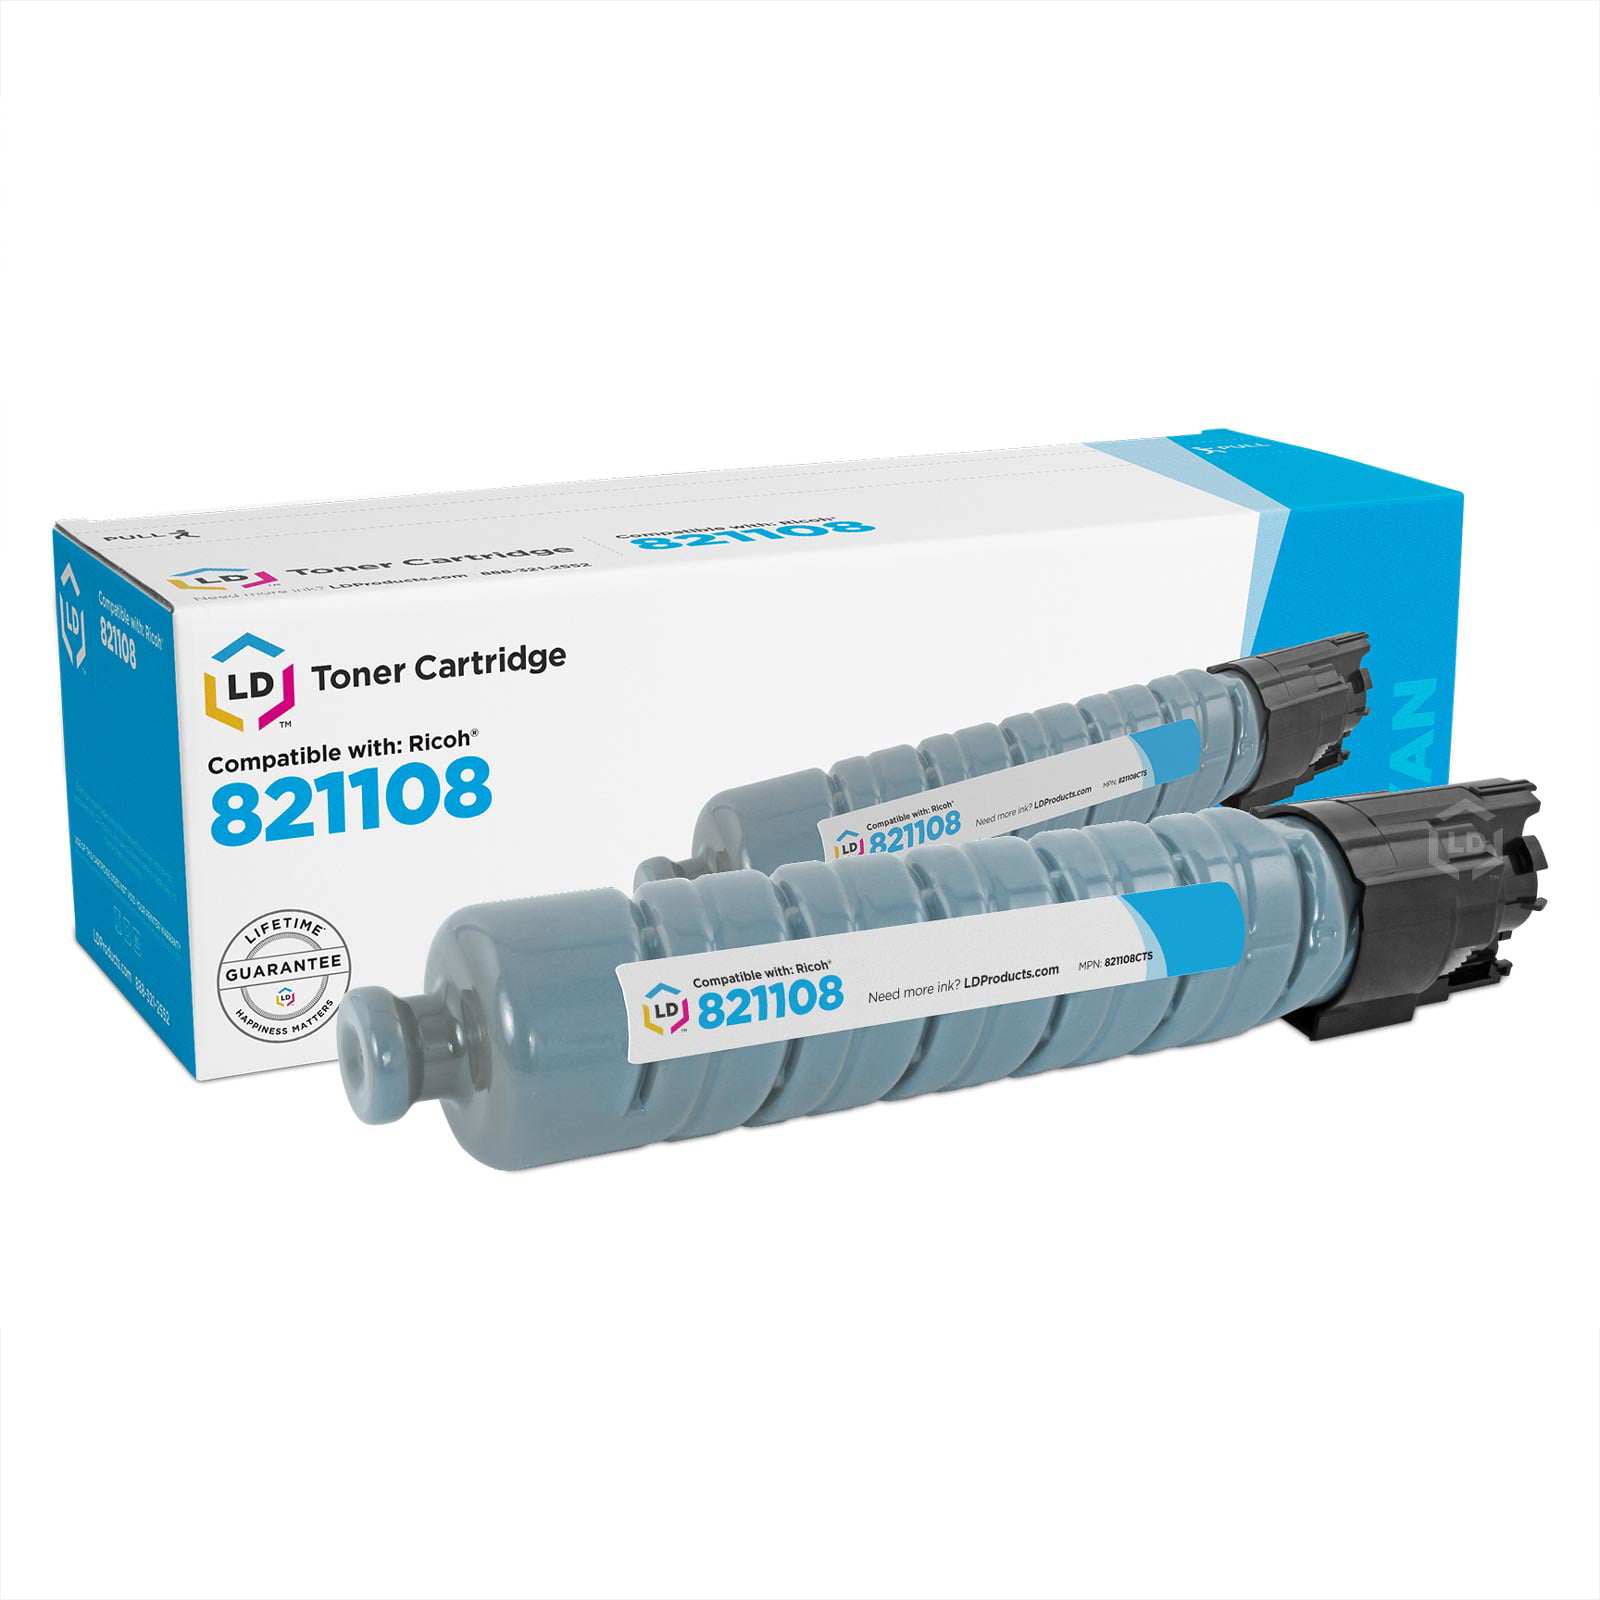 LD Compatible Replacement for Ricoh 821108 (821073) Cyan Laser Toner Cartridge for use in Ricoh Aficio C430DN, SP C431DN, SP SP C431DNHT, and SP C431DNHW s Walmart.com